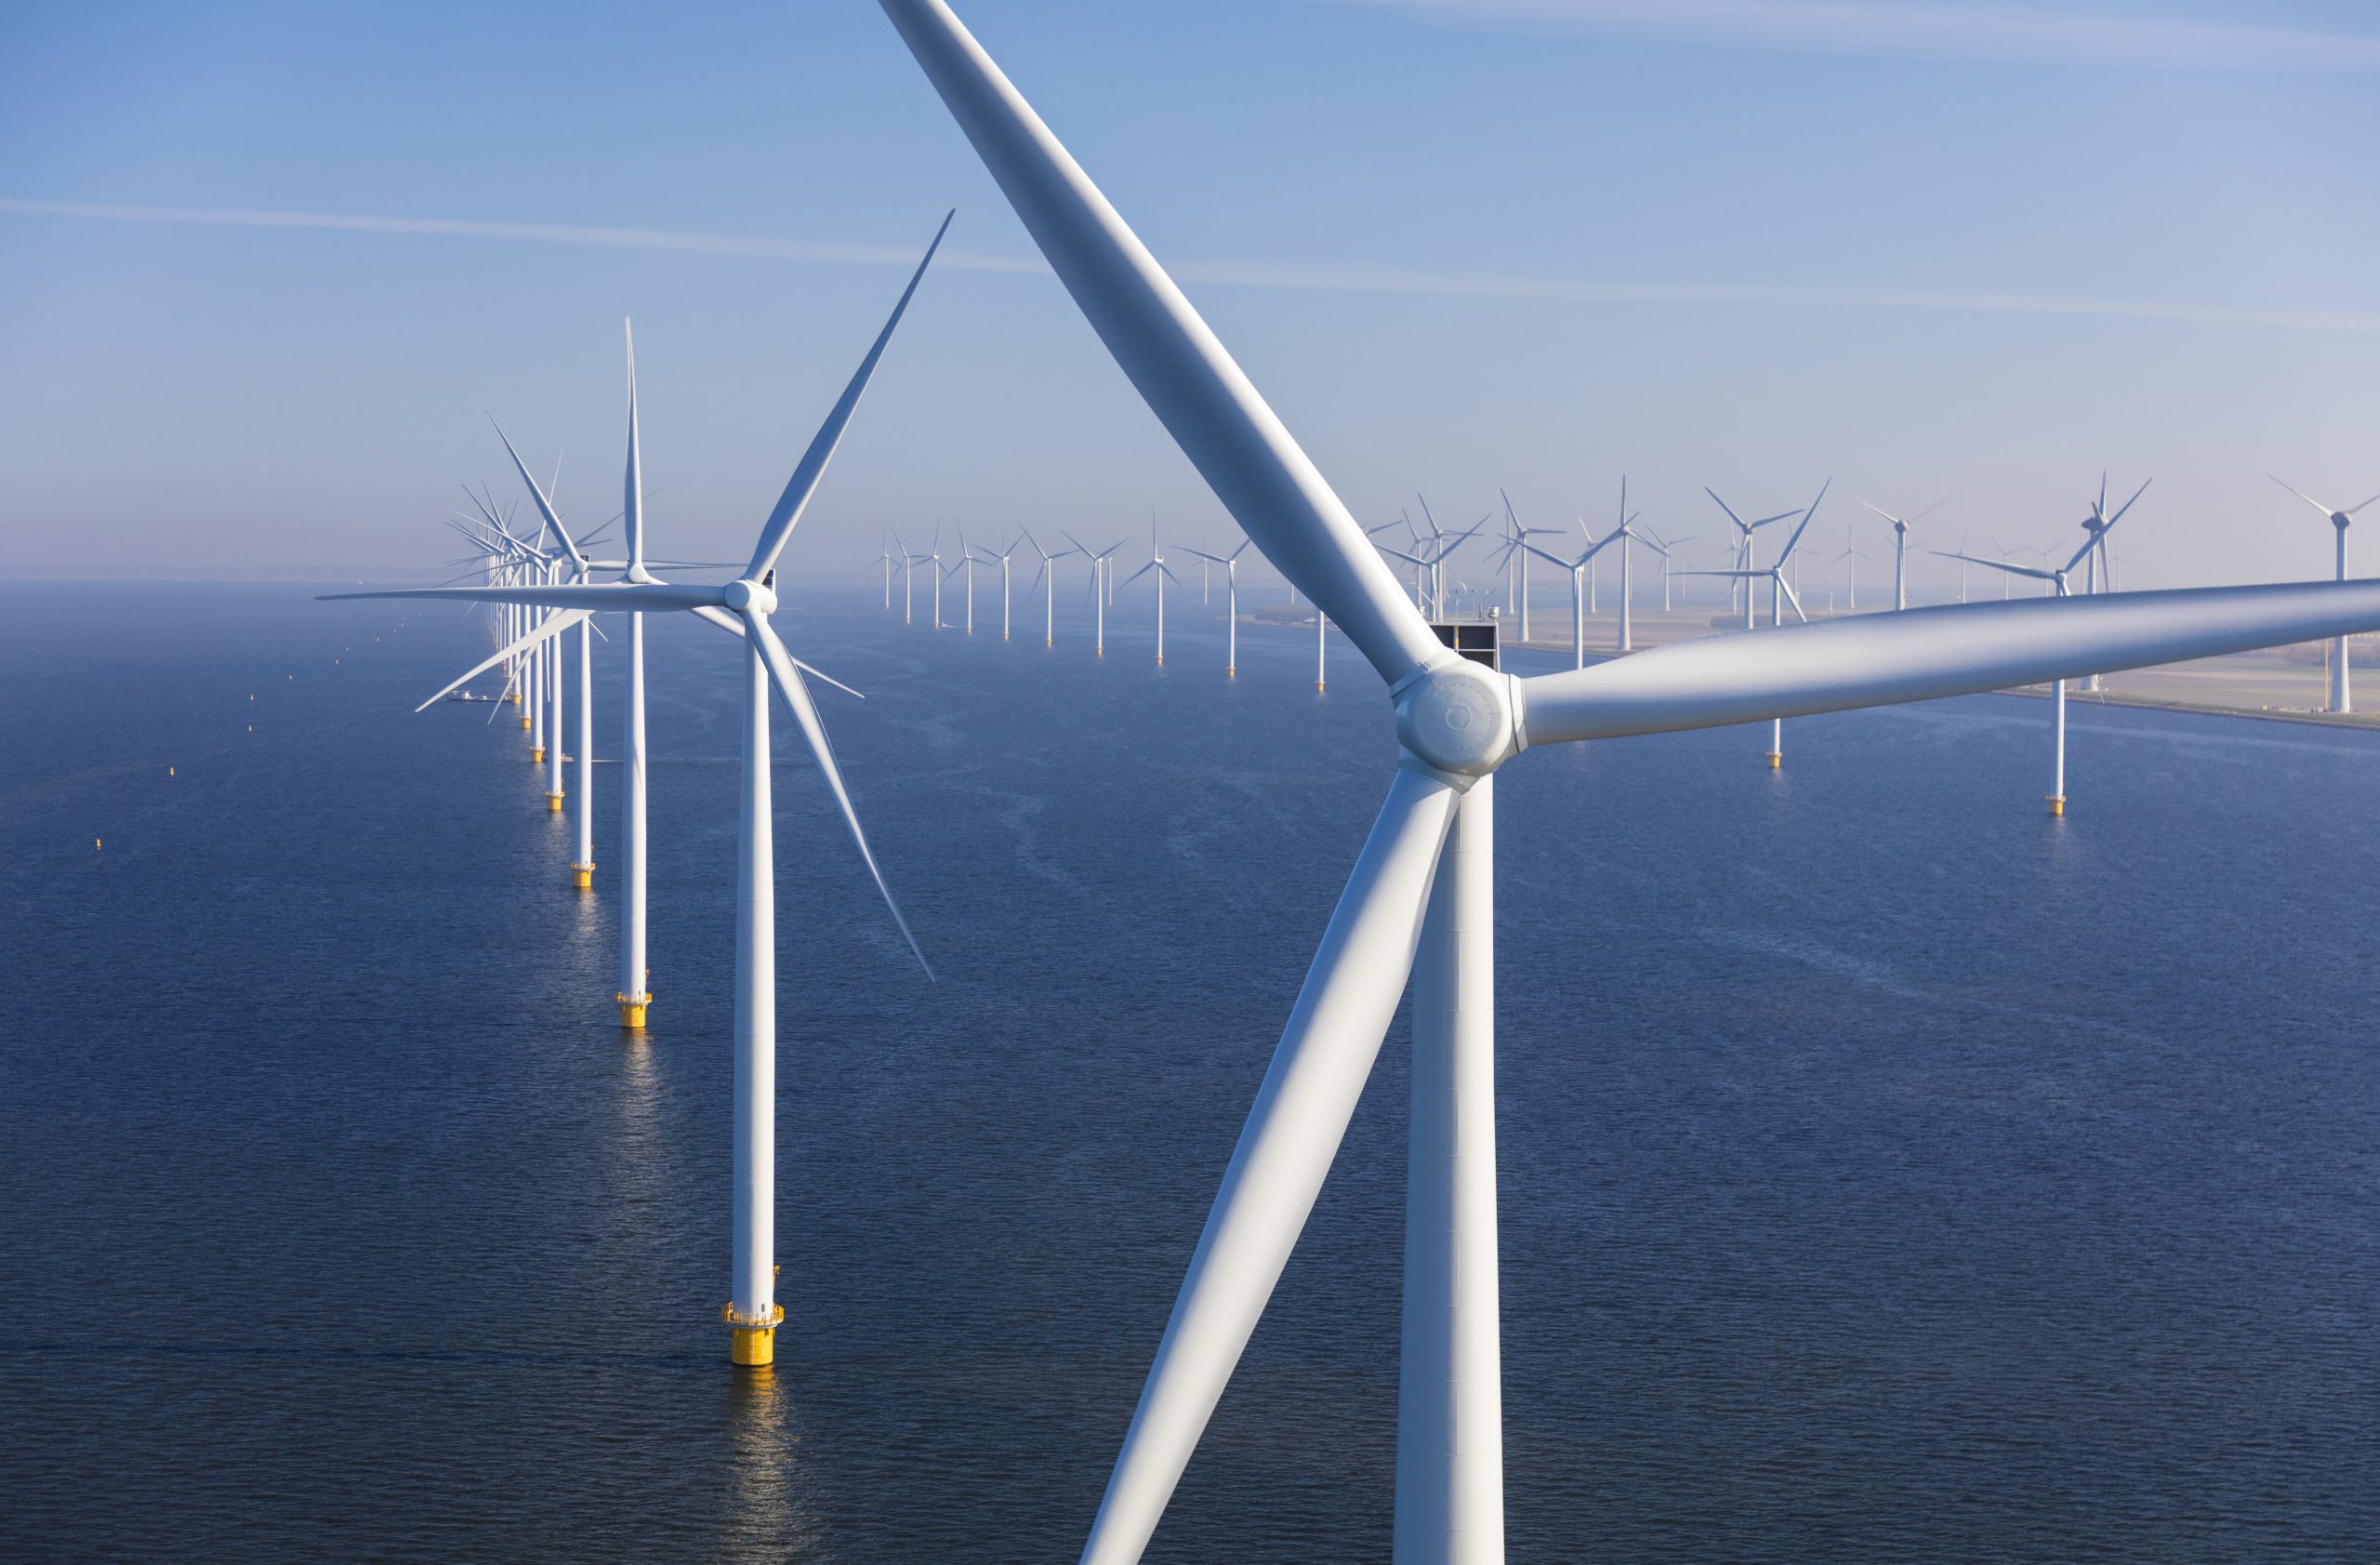 Gigantic new offshore wind farms could power millions of homes in the Netherlands